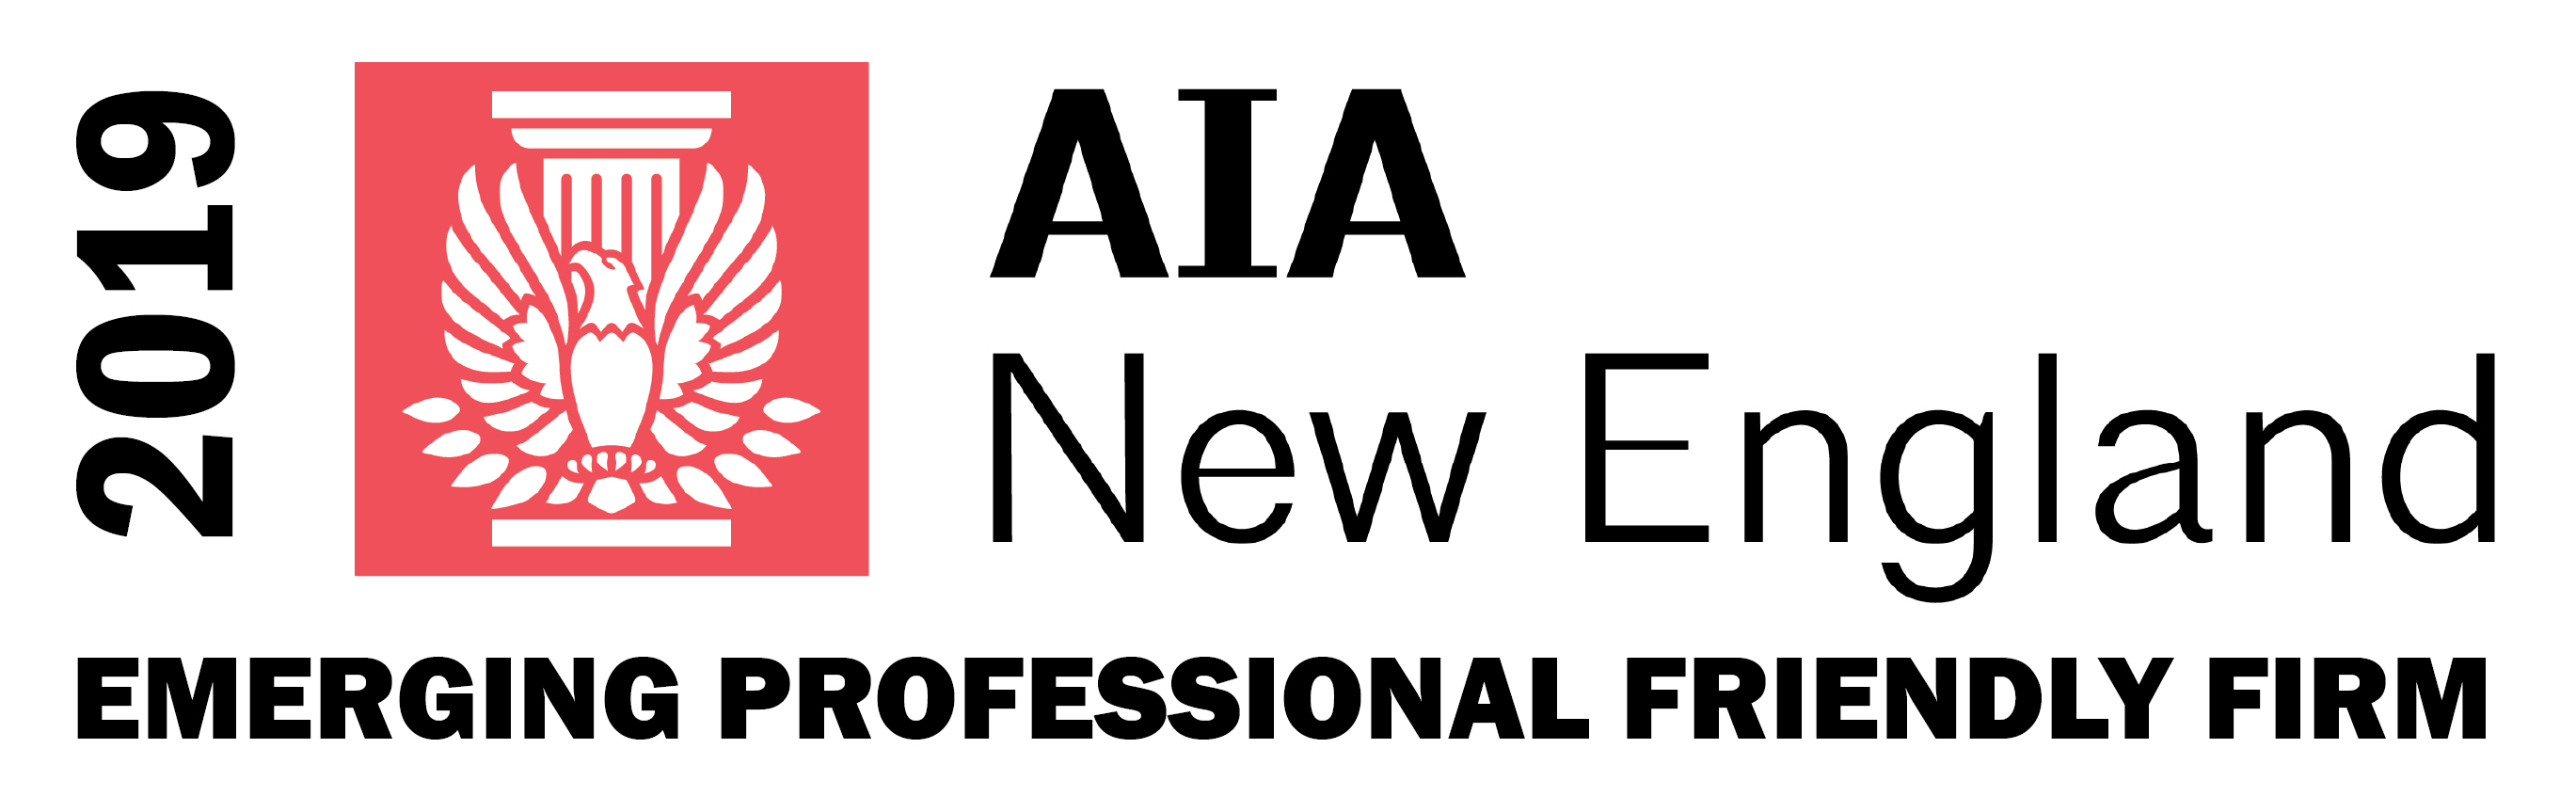 2019 AIA New England Emerging Professional Friendly Firm